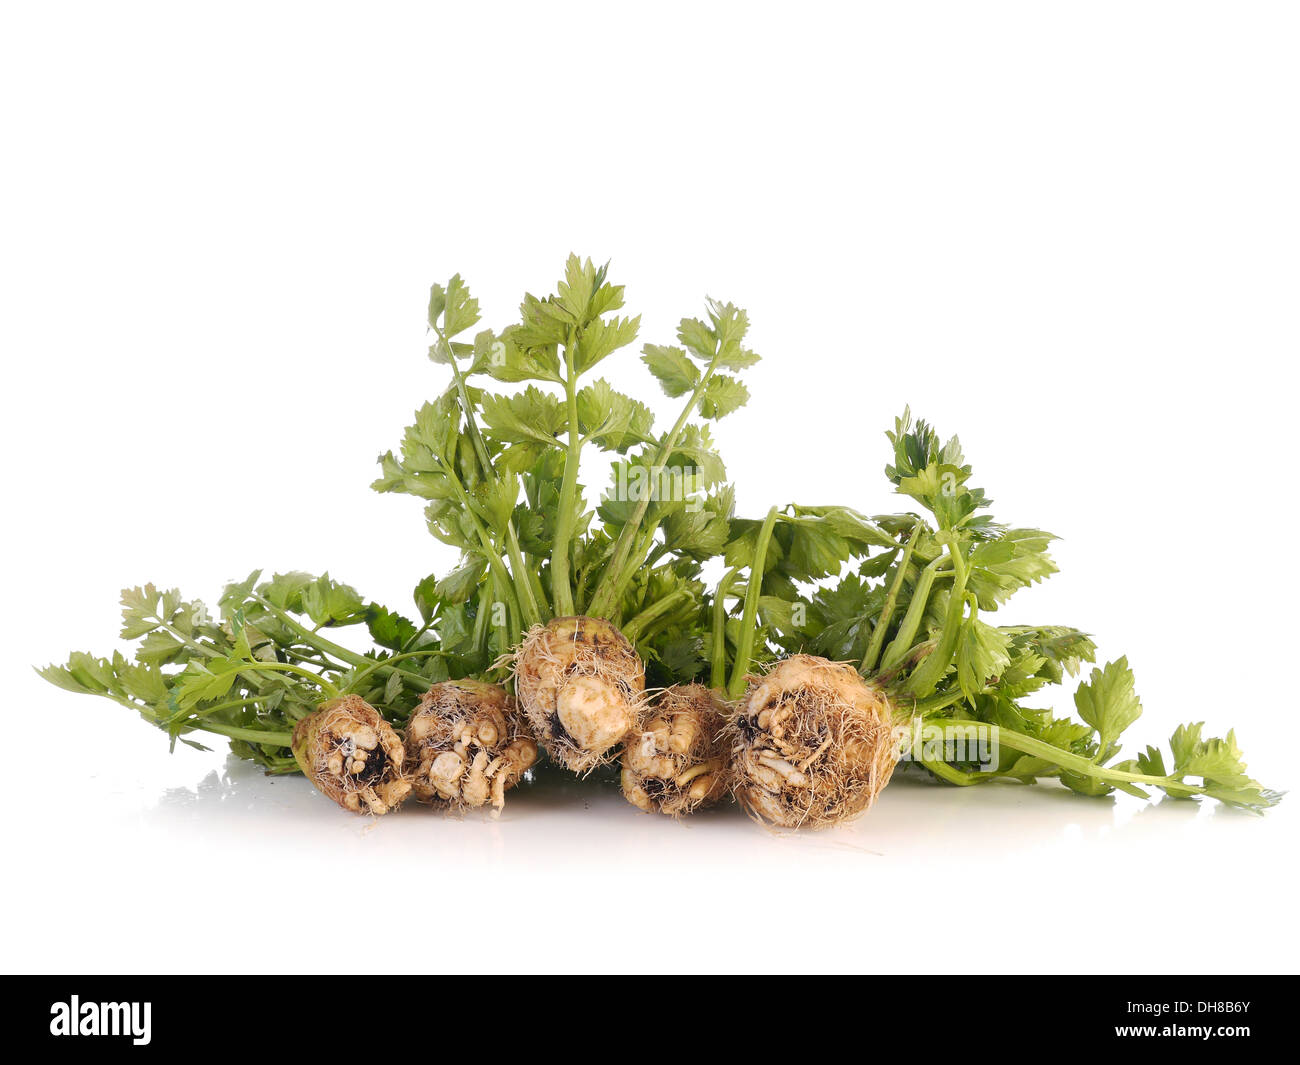 Bundles of fresh cultivated celery shot on white Stock Photo